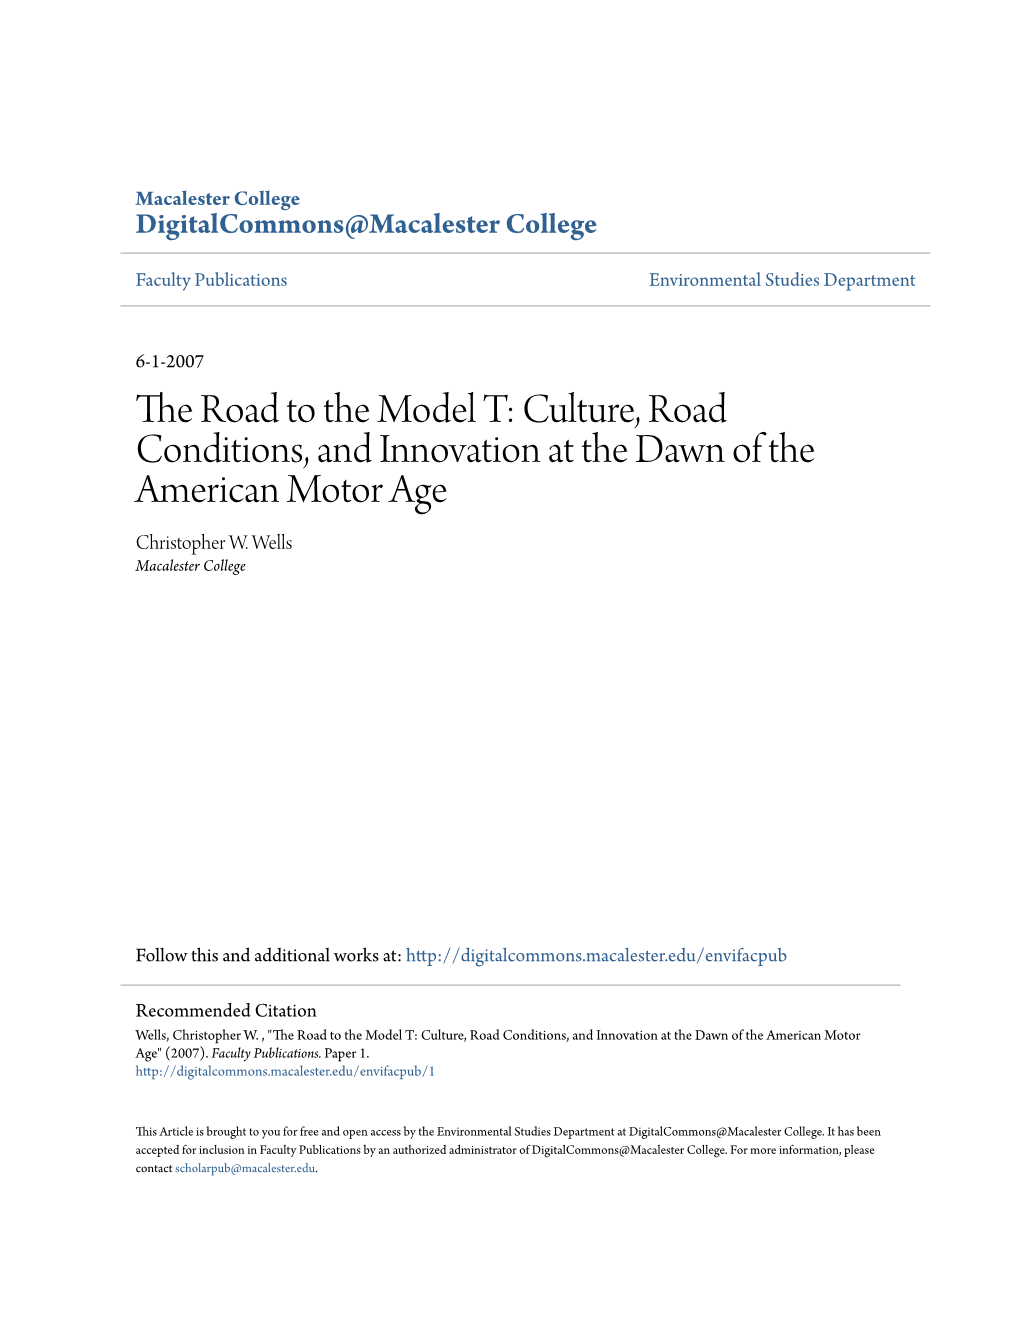 The Road to the Model T: Culture, Road Conditions, and Innovation at the Dawn of the American Motor Age Christopher W